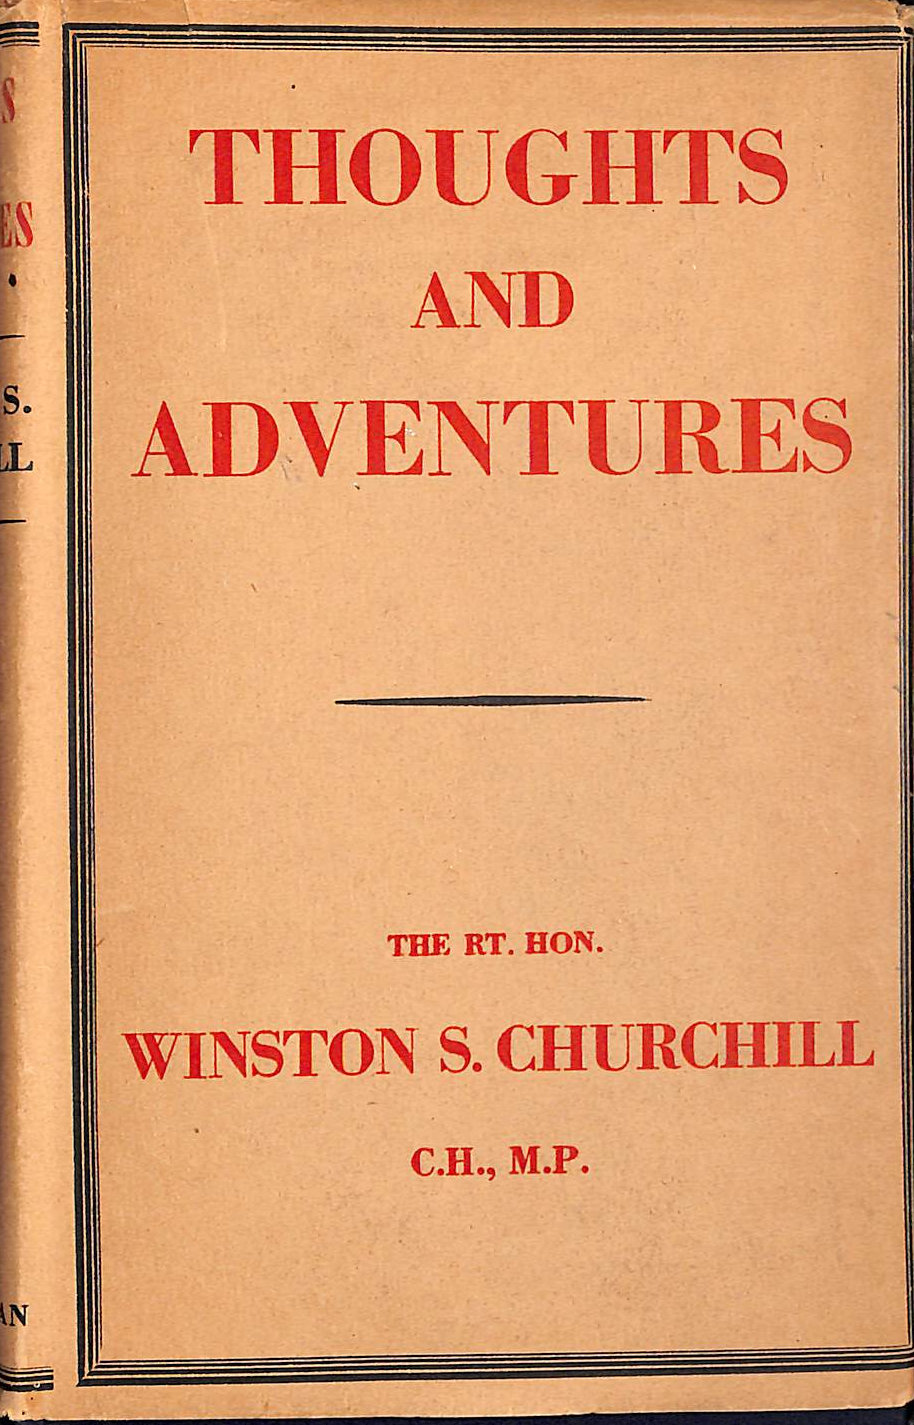 CHURCHILL, WINSTON S - Thoughts and Adventures